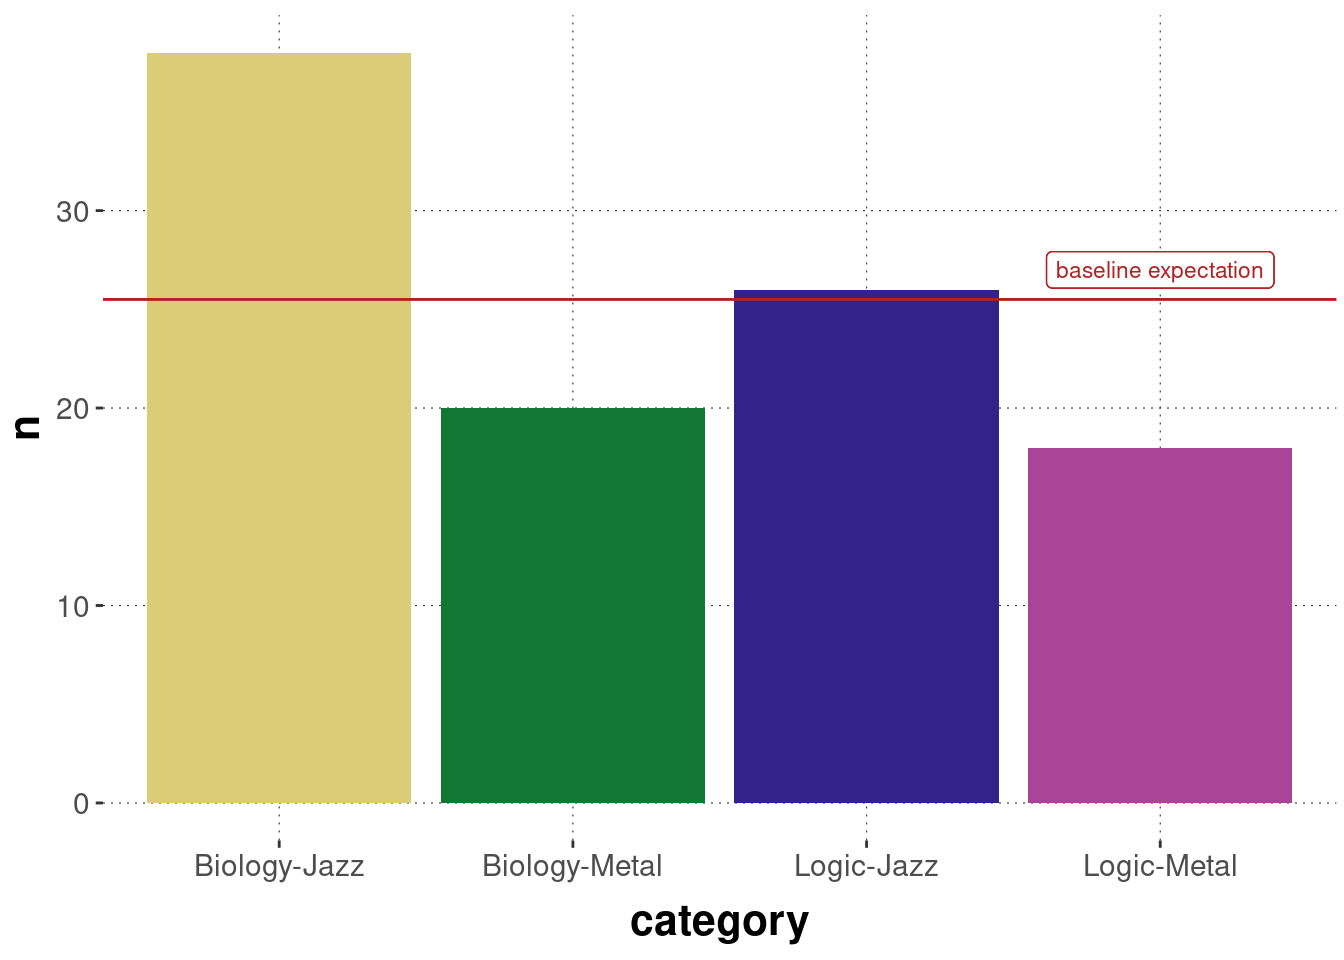 Observed counts of choice pairs of music+subject preference in the BLJM data.